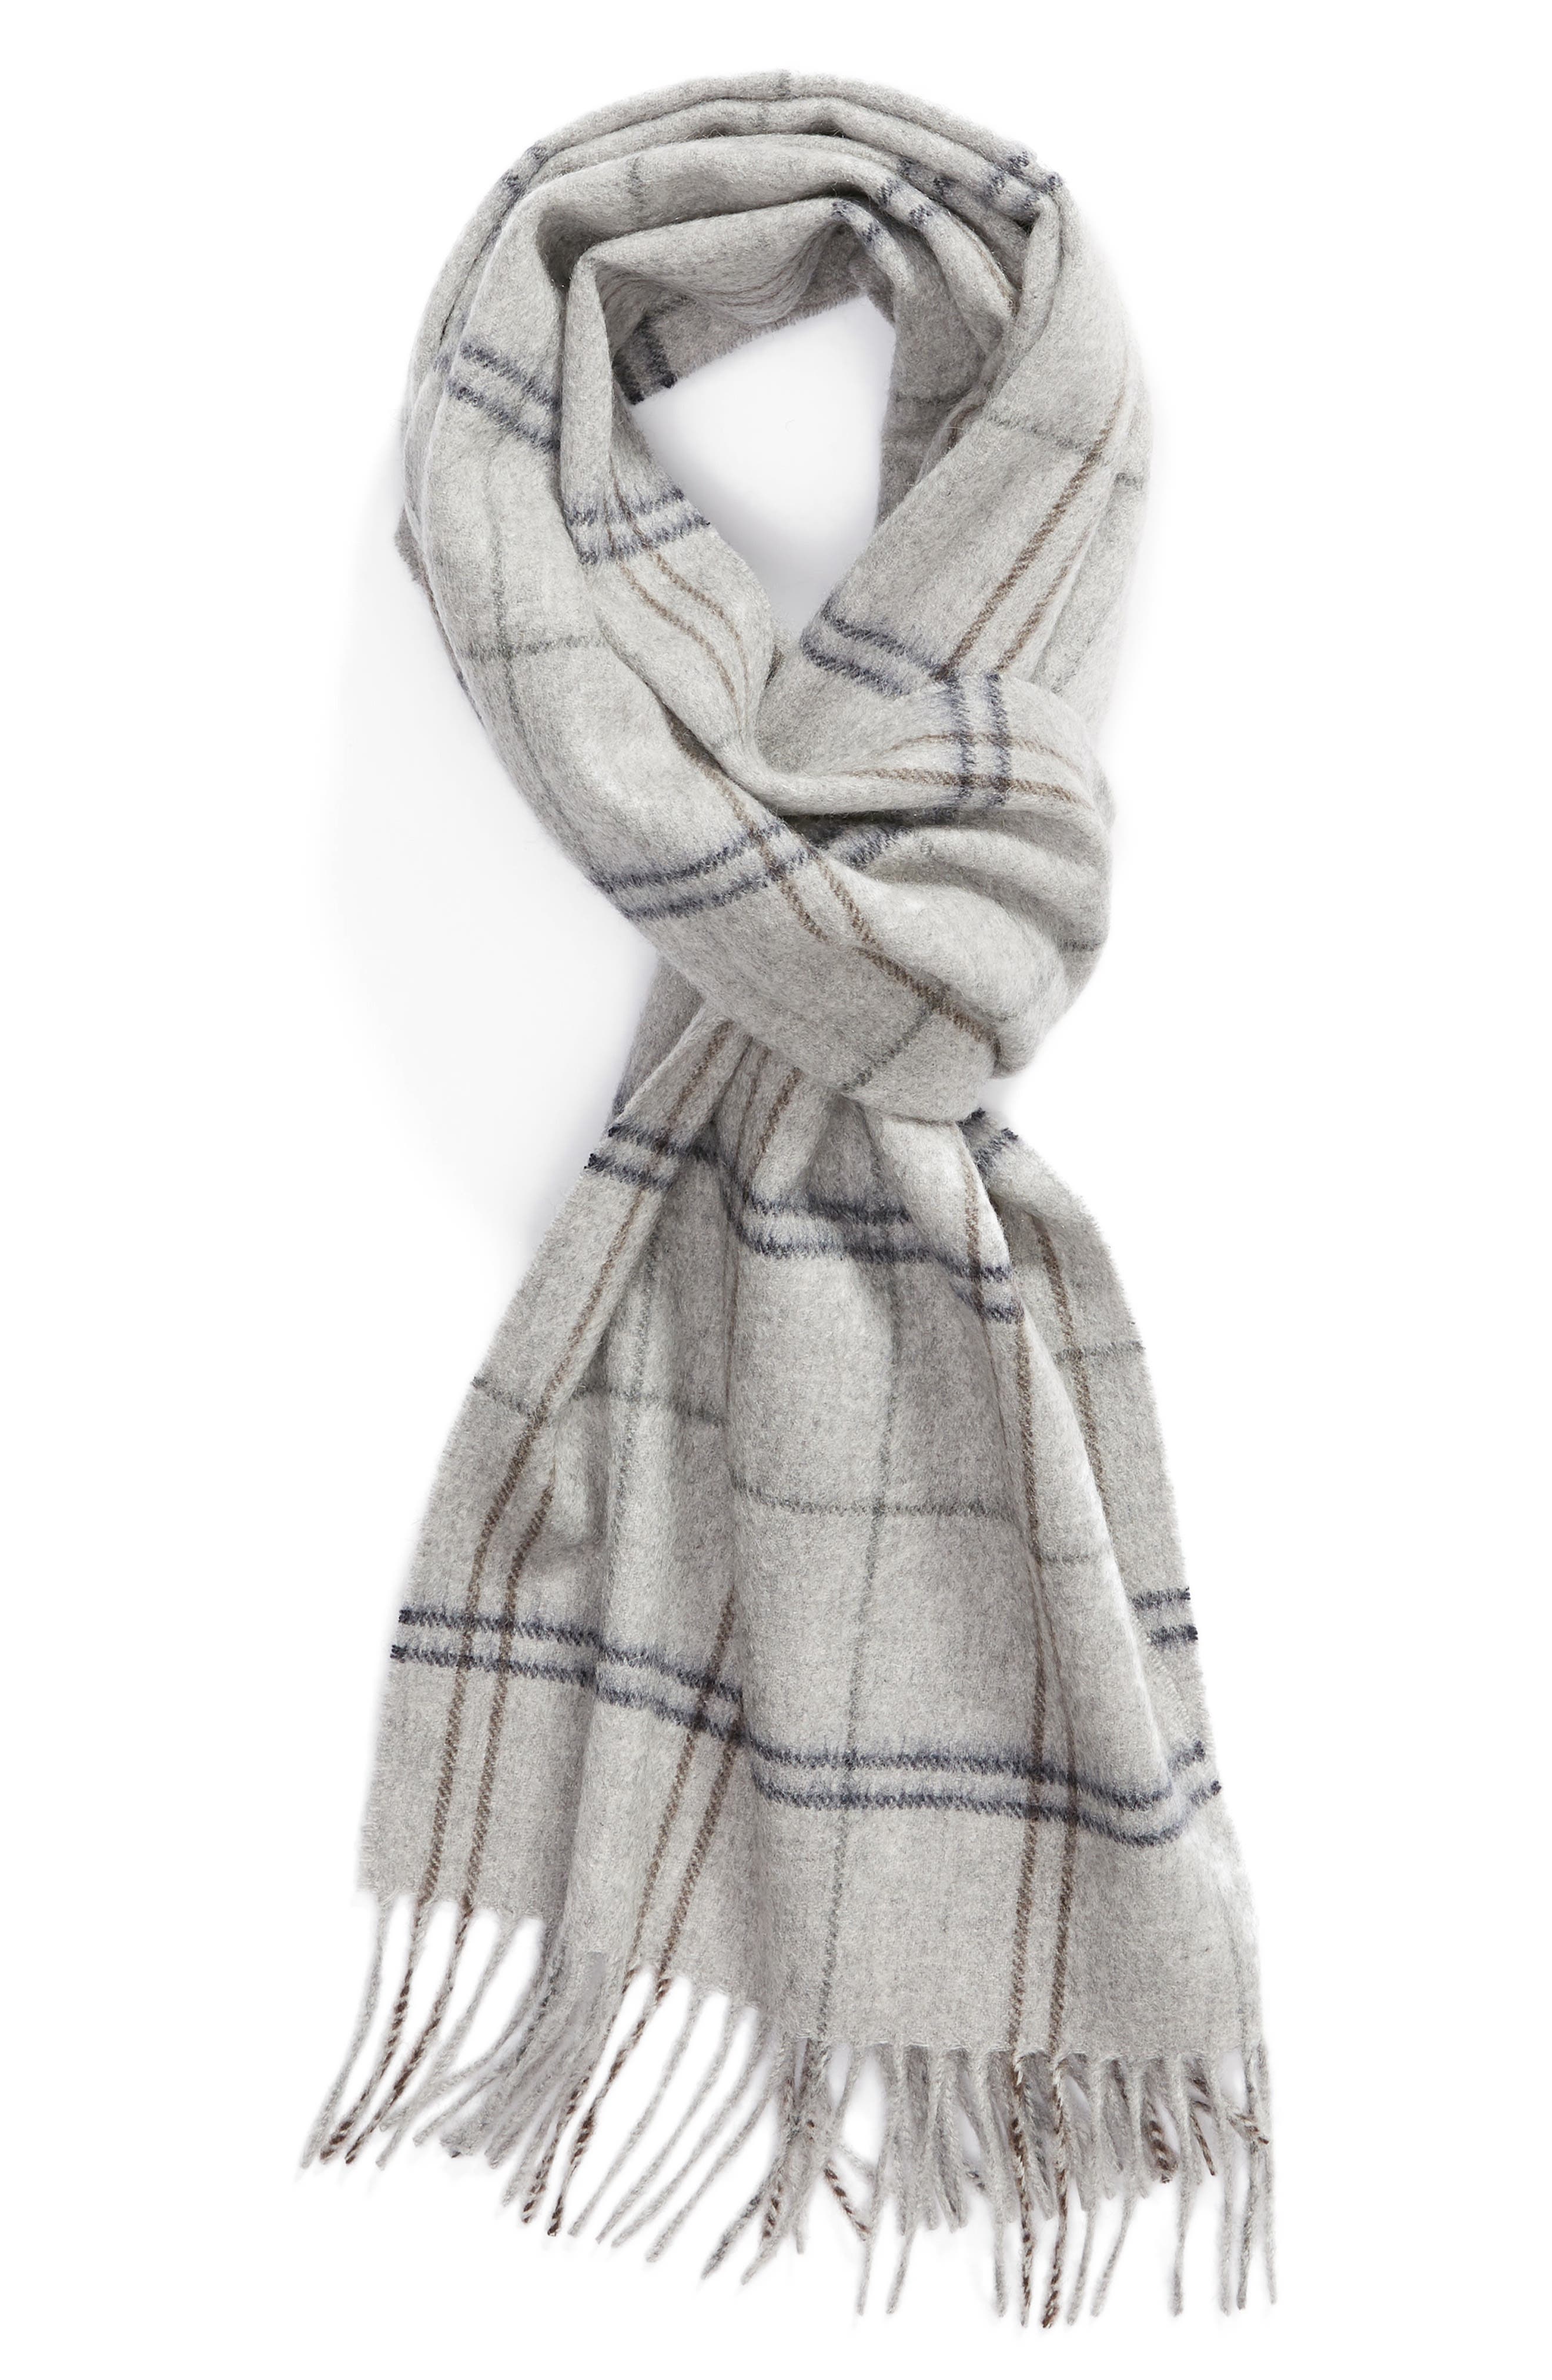 mens burberry scarf nordstrom